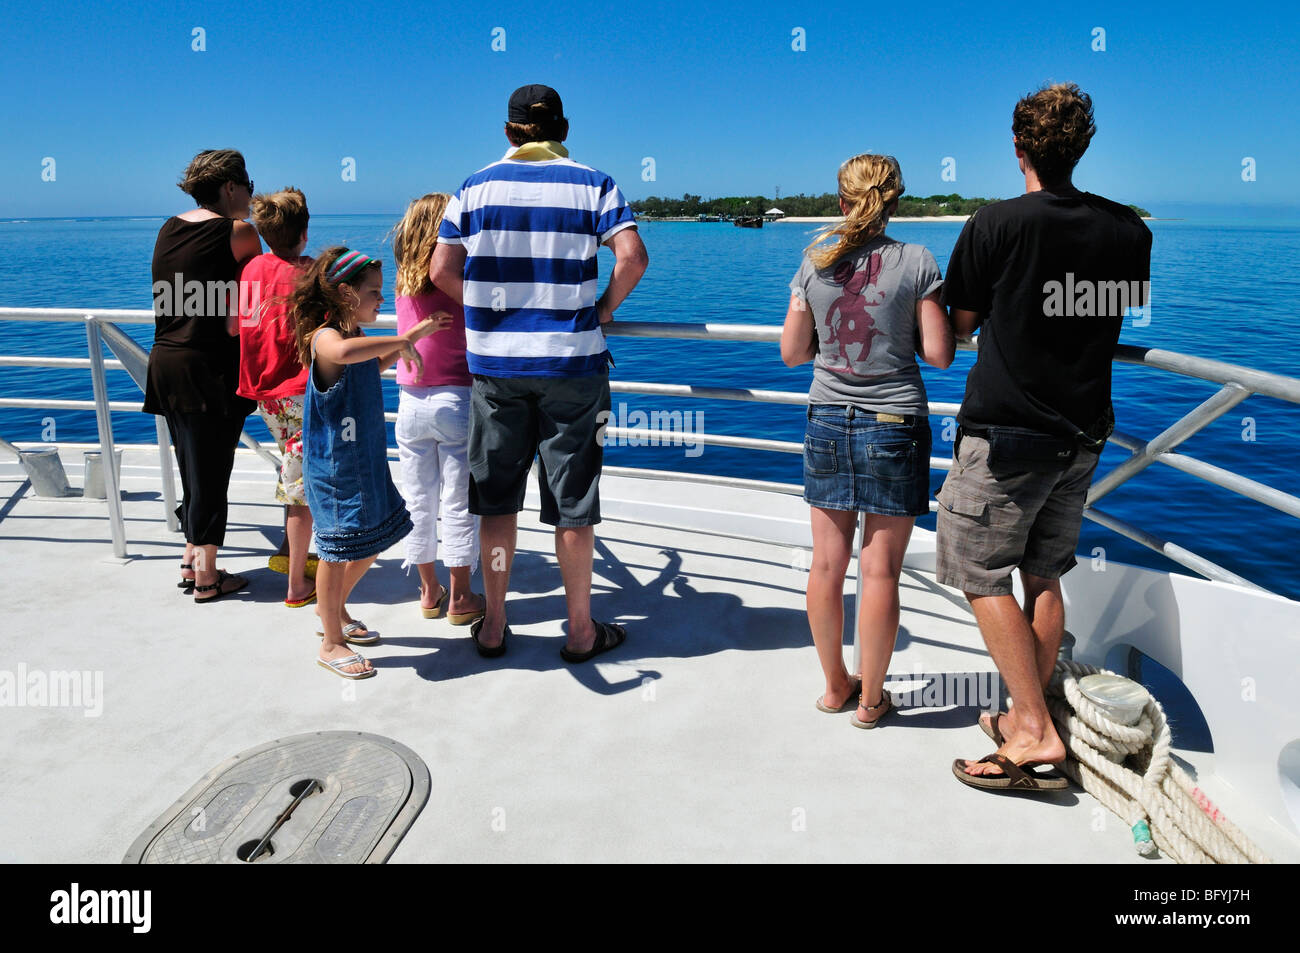 People on a boat approaching Heron Island, Capricornia Cays National Park, Great Barrier Reef, Queensland, Australia Stock Photo